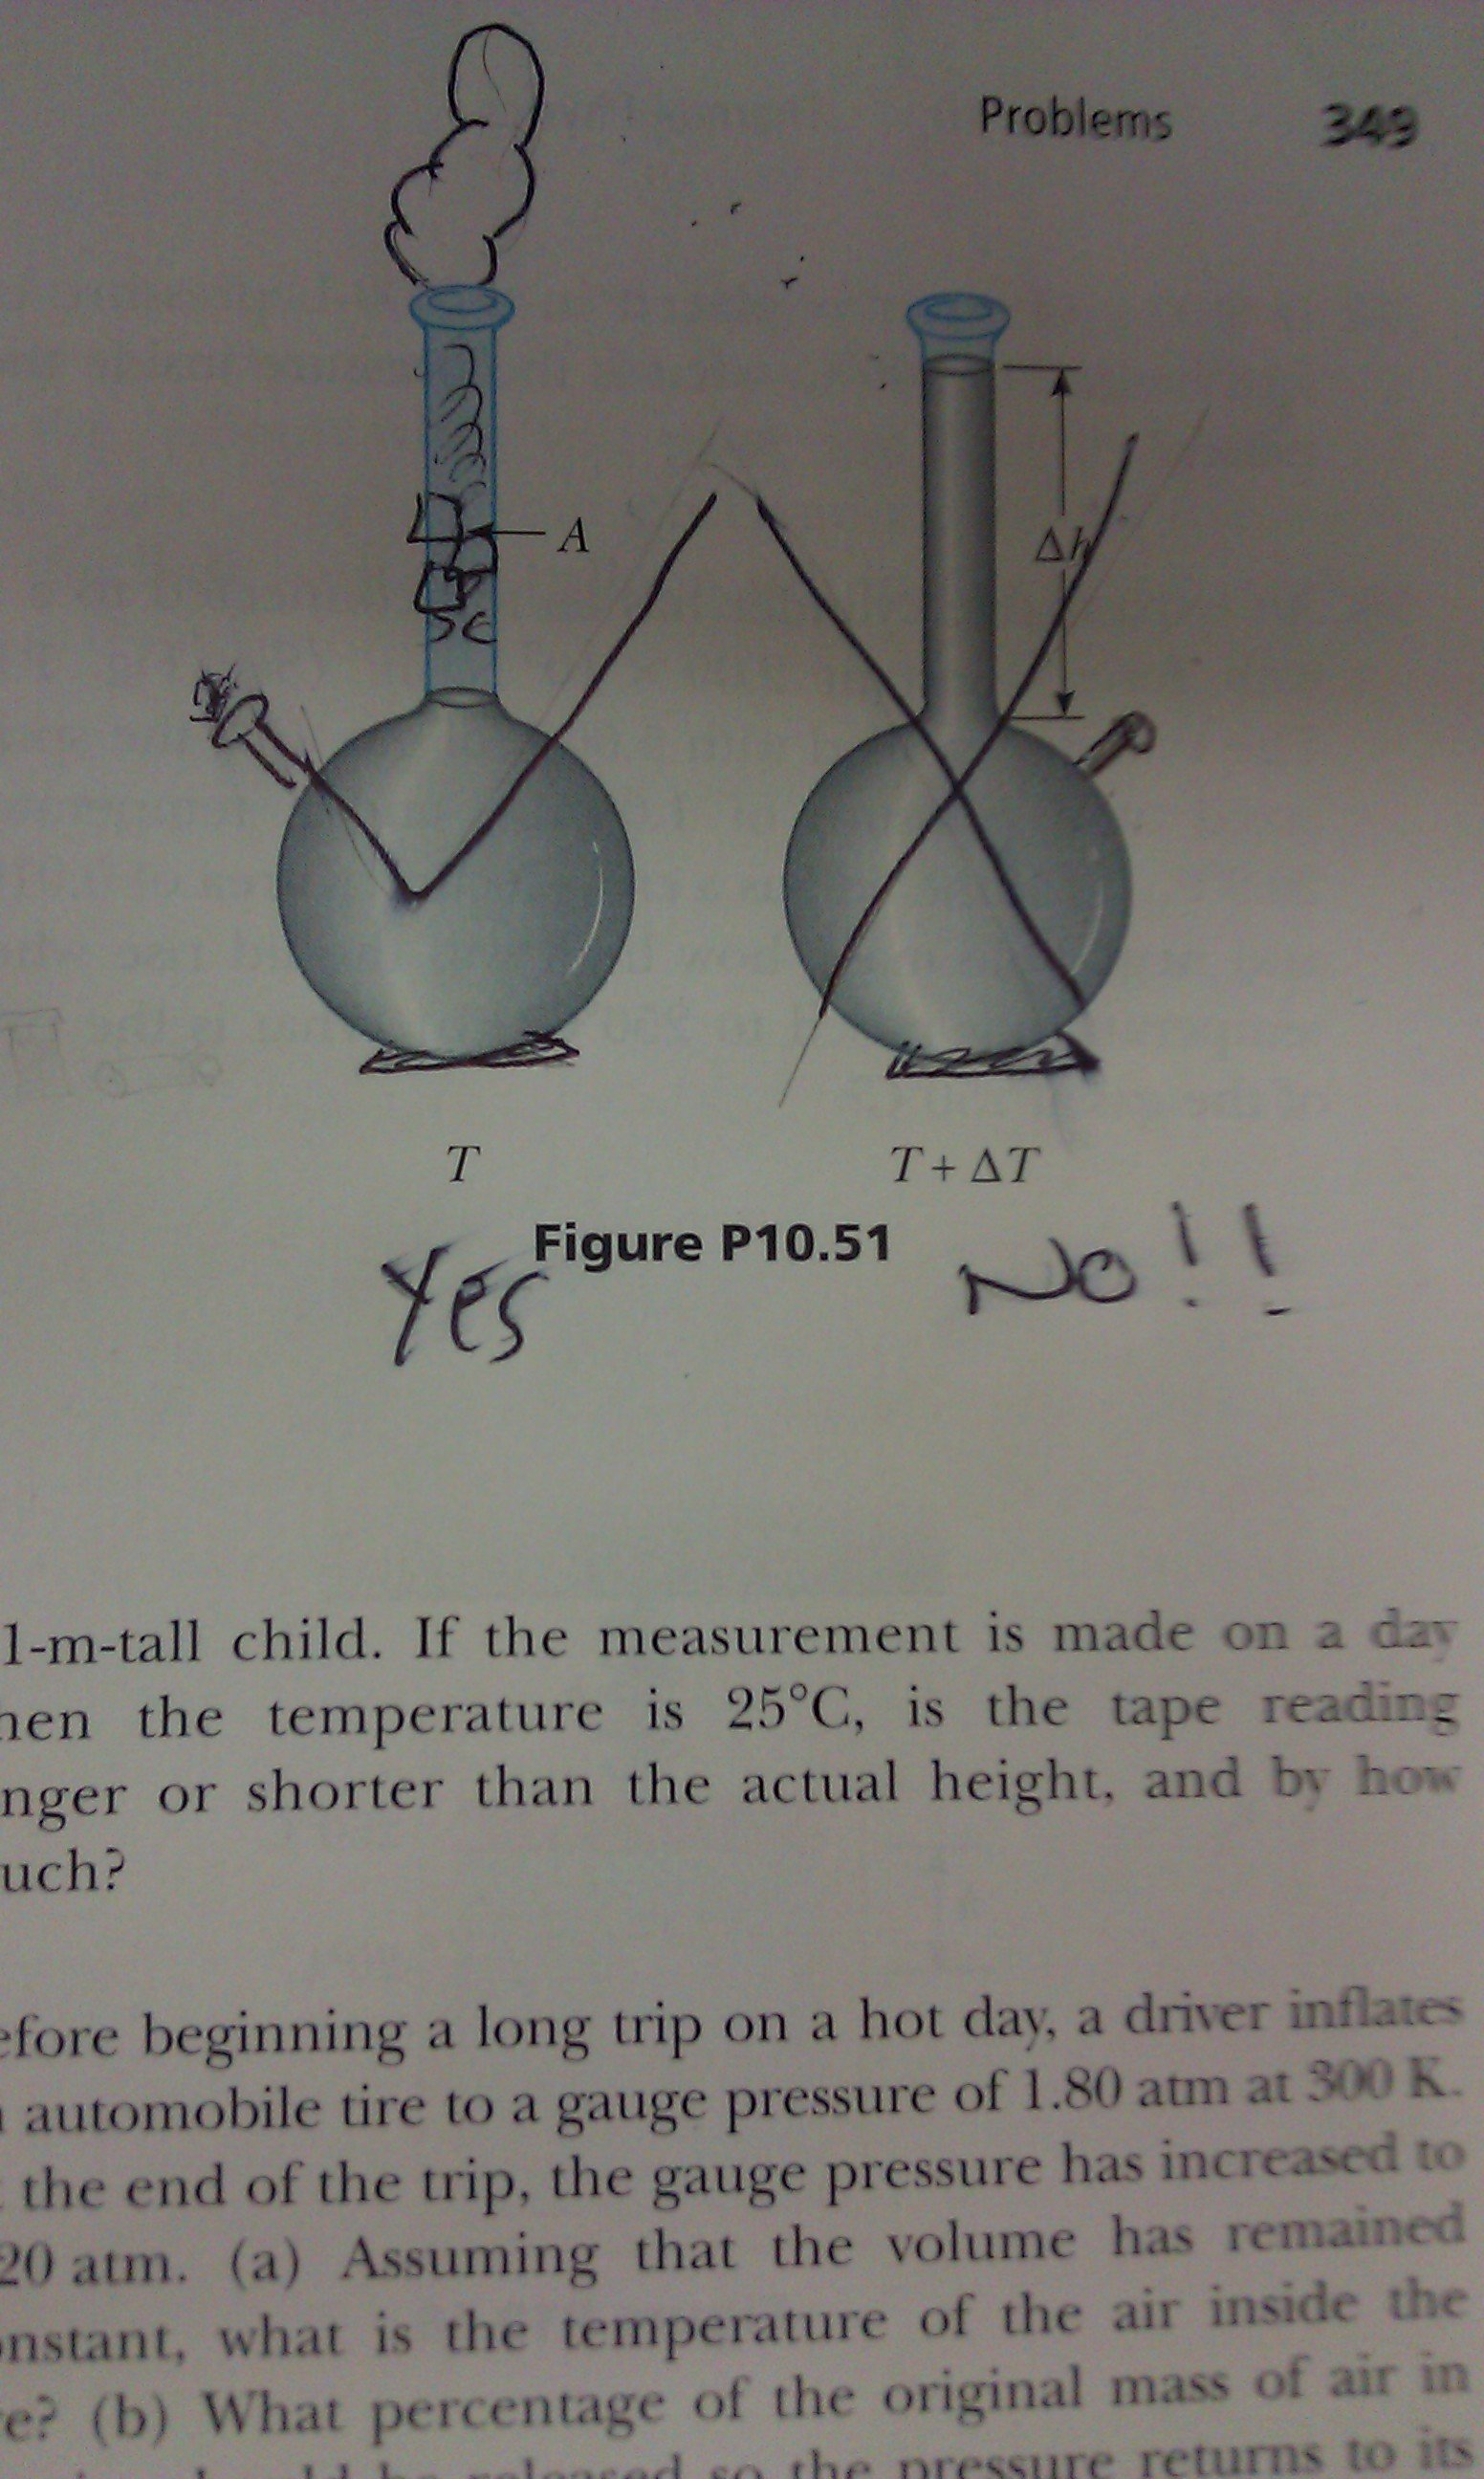 Only in Physics class...